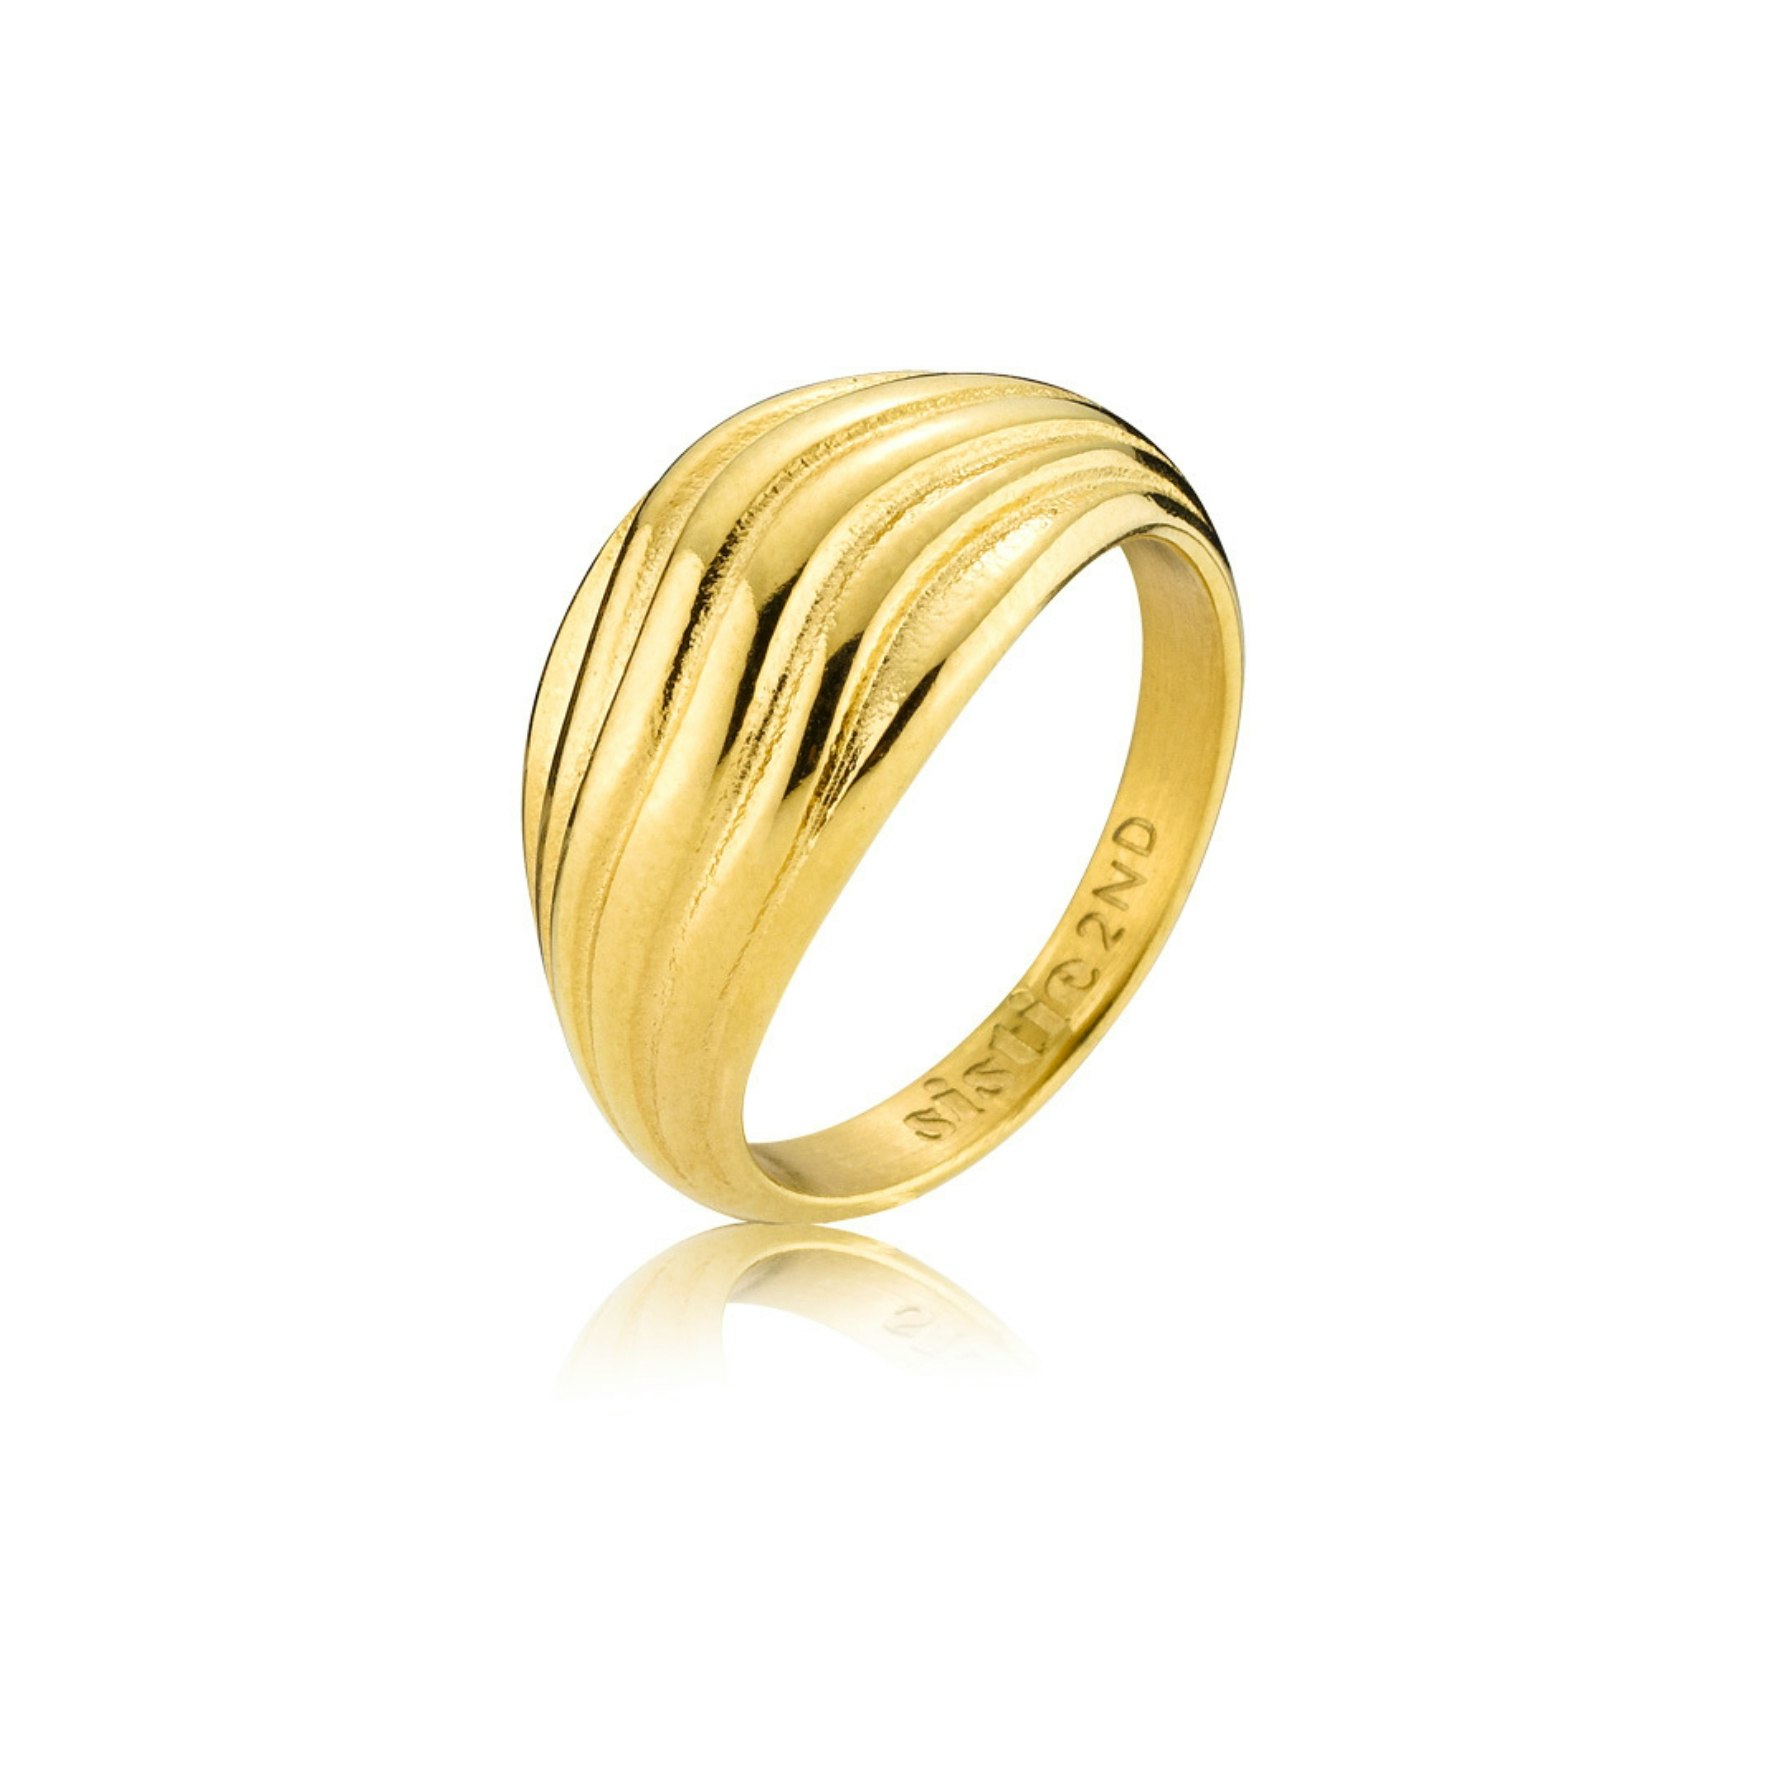 Moana Ring from Sistie 2nd in Goldplated stainless steel